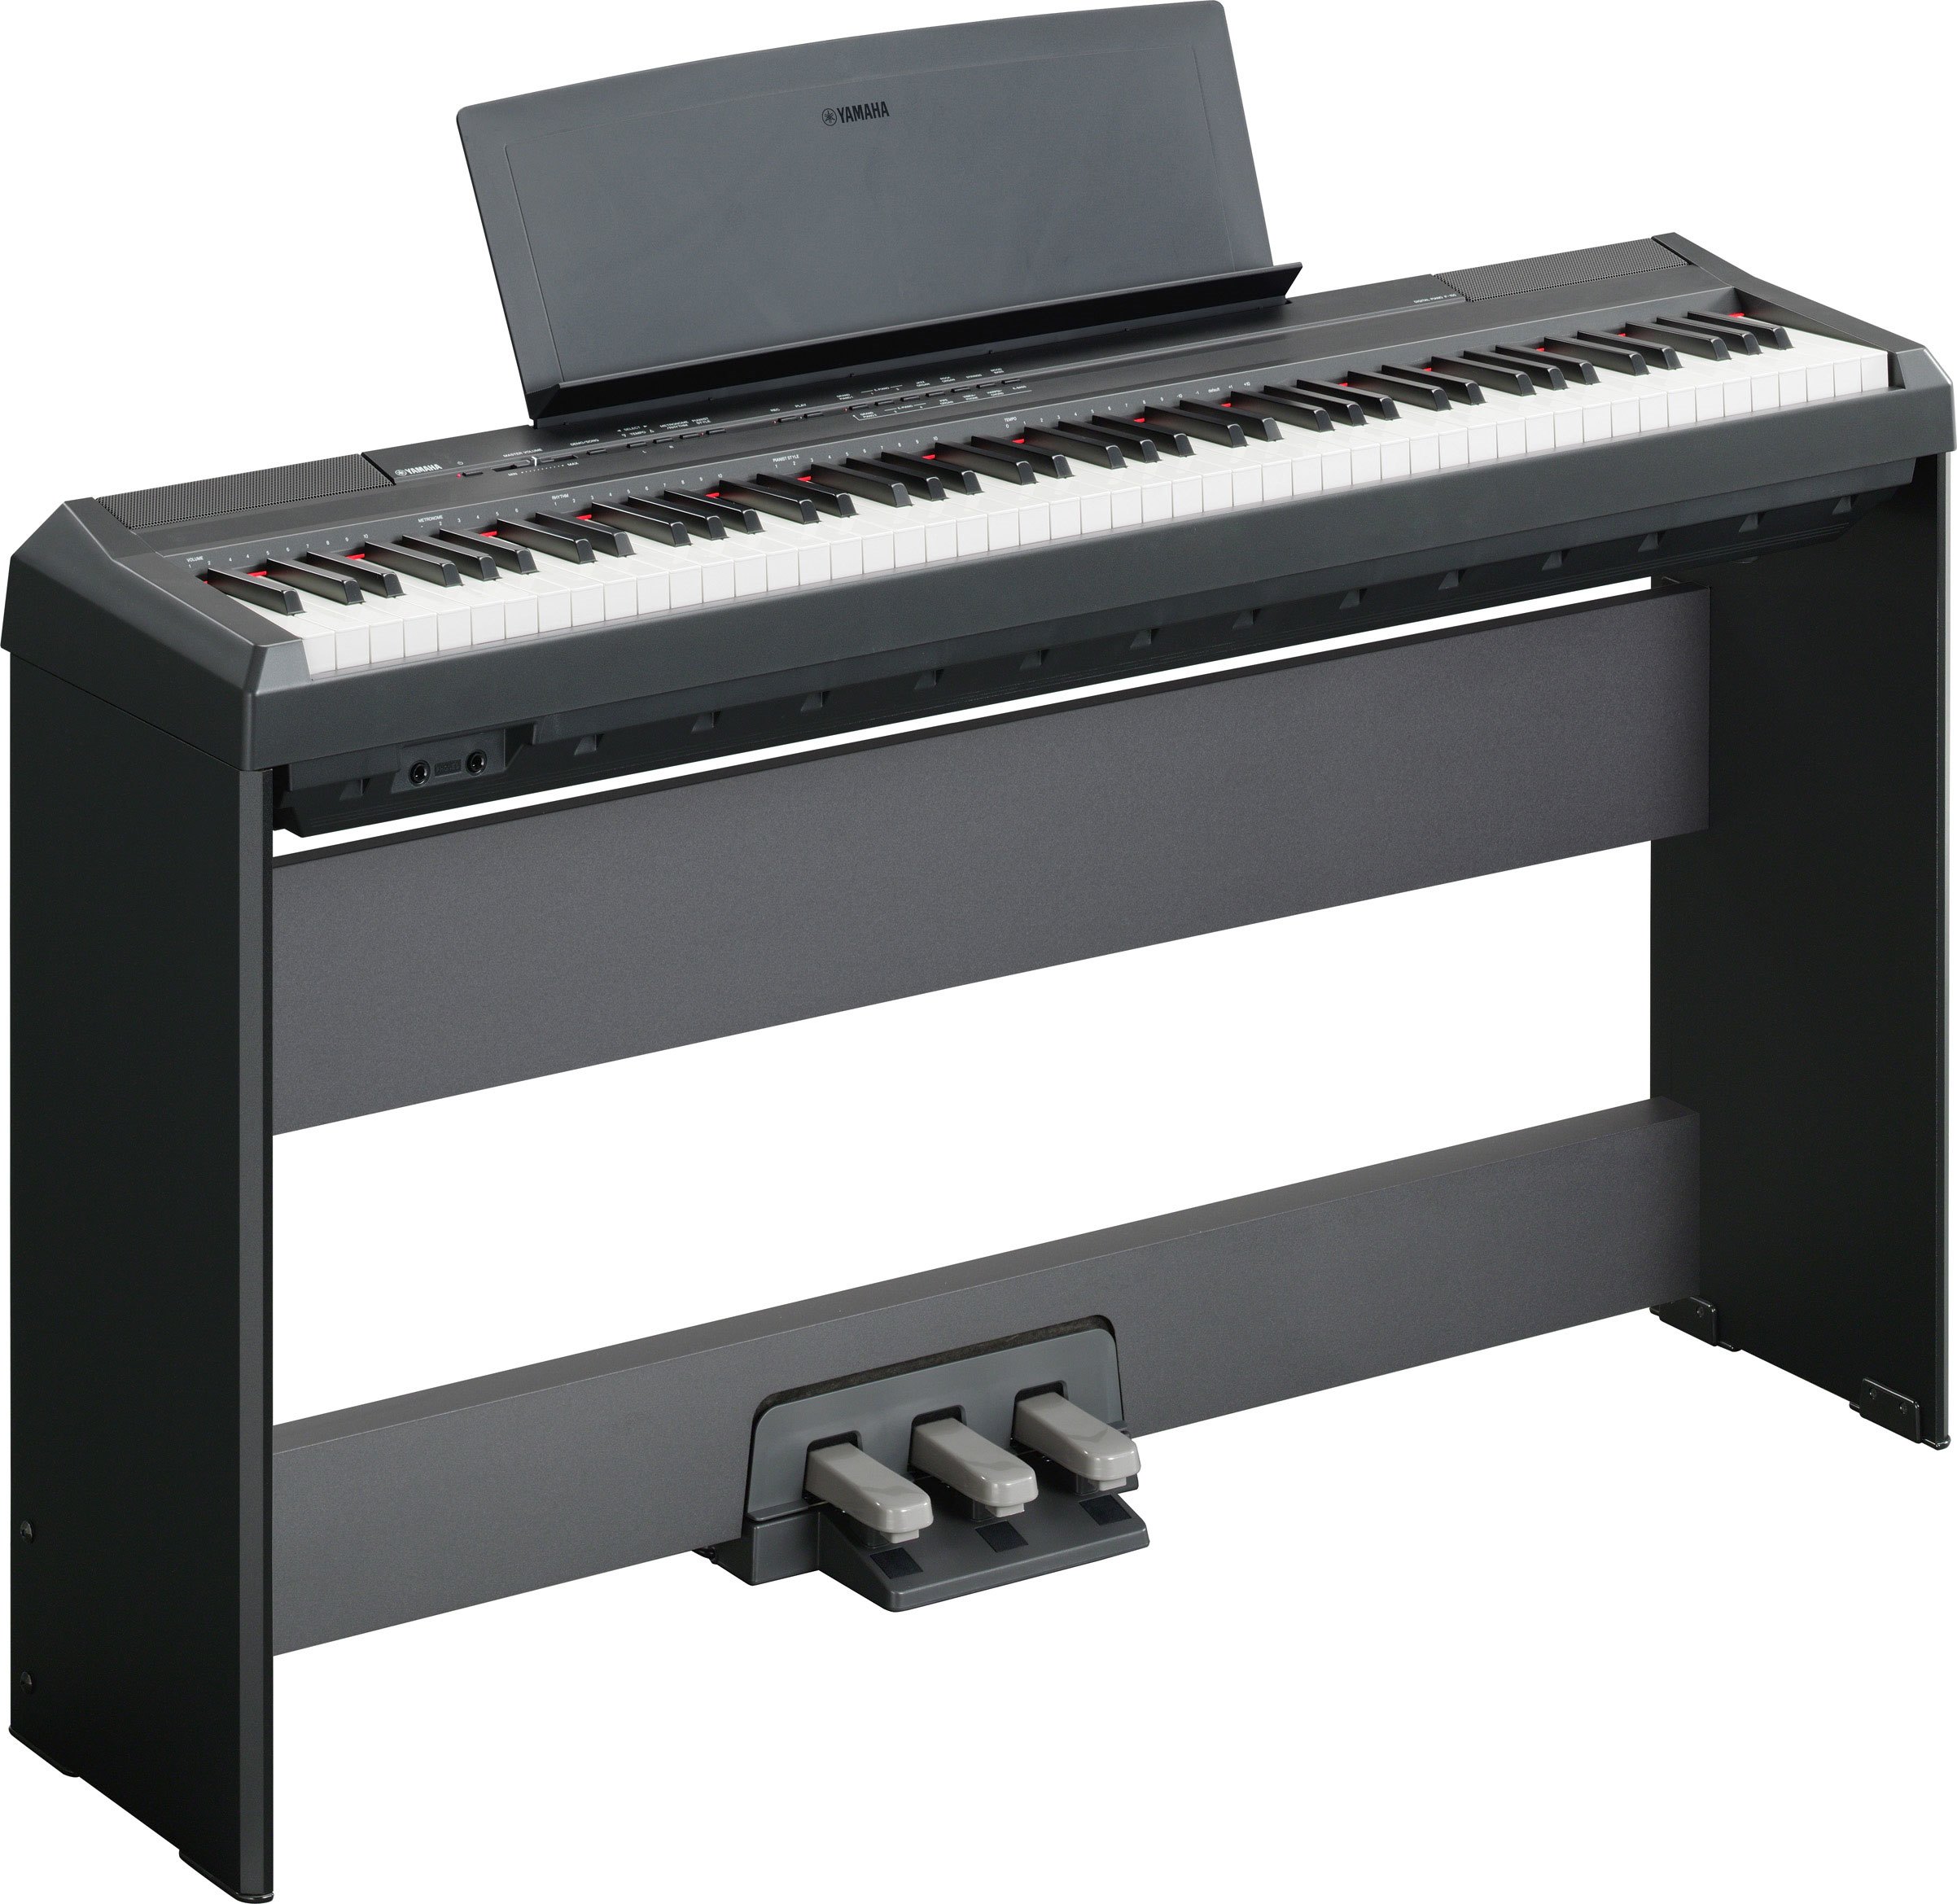 P-105 - Overview - P Series - Pianos - Musical Instruments 